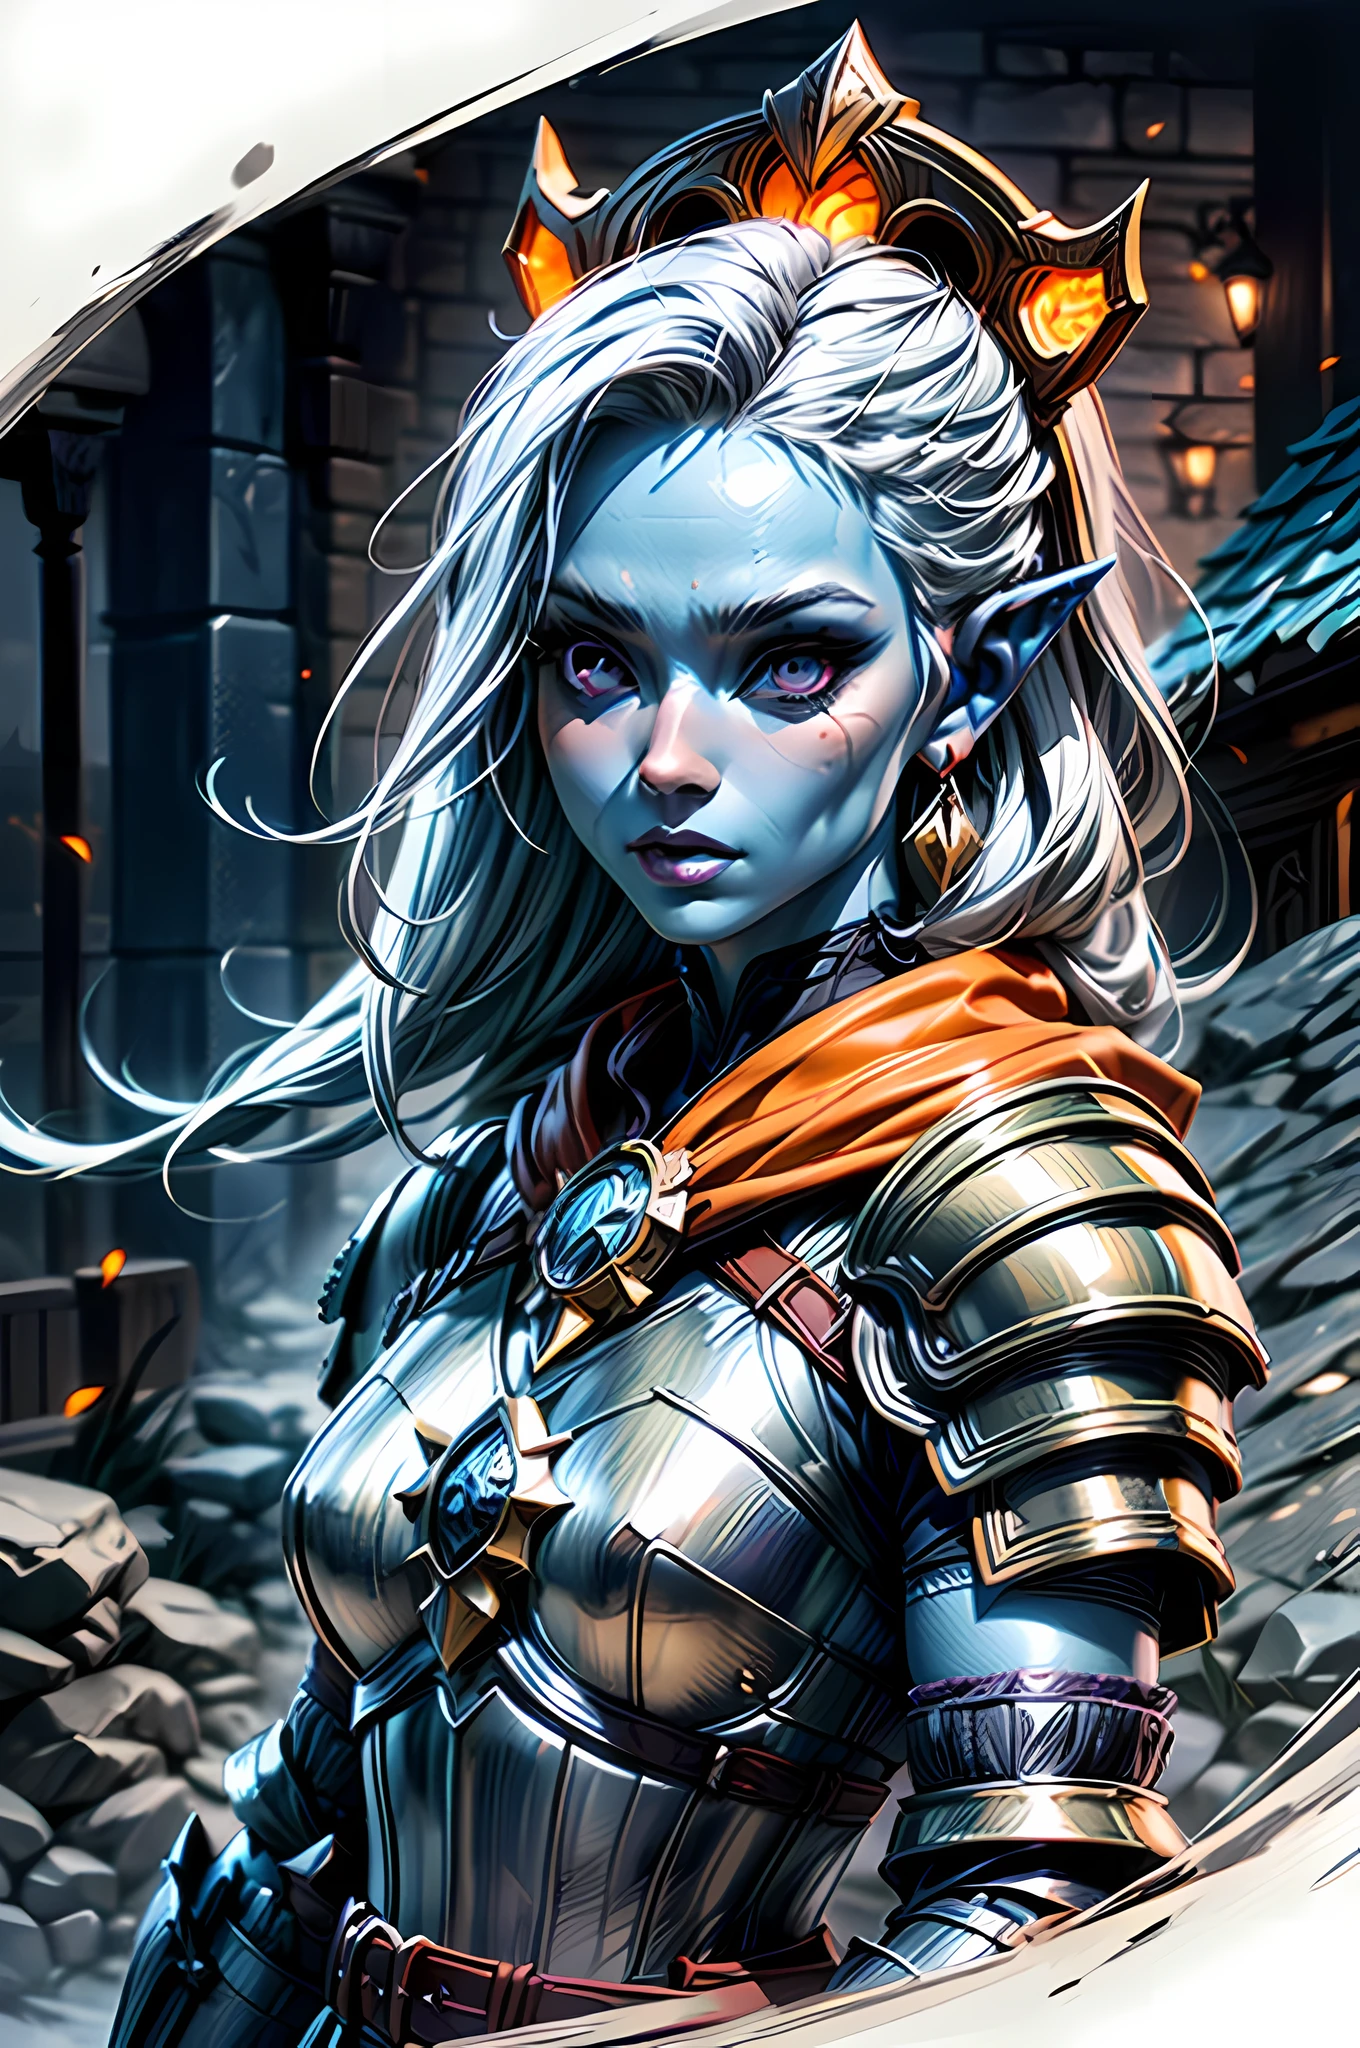 (character design sheet: 1.5) by Larry Elmor, fantasy art, dnd art, RPG art, intense details, highly detailed, photorealistic, best quality, highres, (character design sheet: 1.5) a female (fantasy art, Masterpiece, best quality: 1.3) ((blue skin: 1.5)), intense details facial details, exquisite beauty, (fantasy art, Masterpiece, best quality) cleric, (blue: 1.3) skinned female, (white hair: 1.4), long hair, (hair hides ears: 1.5), (purple eyes: 1.3), fantasy art, Masterpiece, best quality) armed a fiery sword red fire, wearing heavy (white: 1.3) half plate mail armor, wearing high heeled laced boots, wearing an(orange :1.3) cloak, wearing glowing holy symbol GlowingRunes_yellow, within fantasy temple background, reflection light, high details, best quality, 16k, [ultra detailed], masterpiece, best quality, (extremely detailed), close up, ultra wide shot, photorealistic, RAW, fantasy art, dnd art, fantasy art, realistic art,((best quality)), ((masterpiece)), (detailed), perfect face,